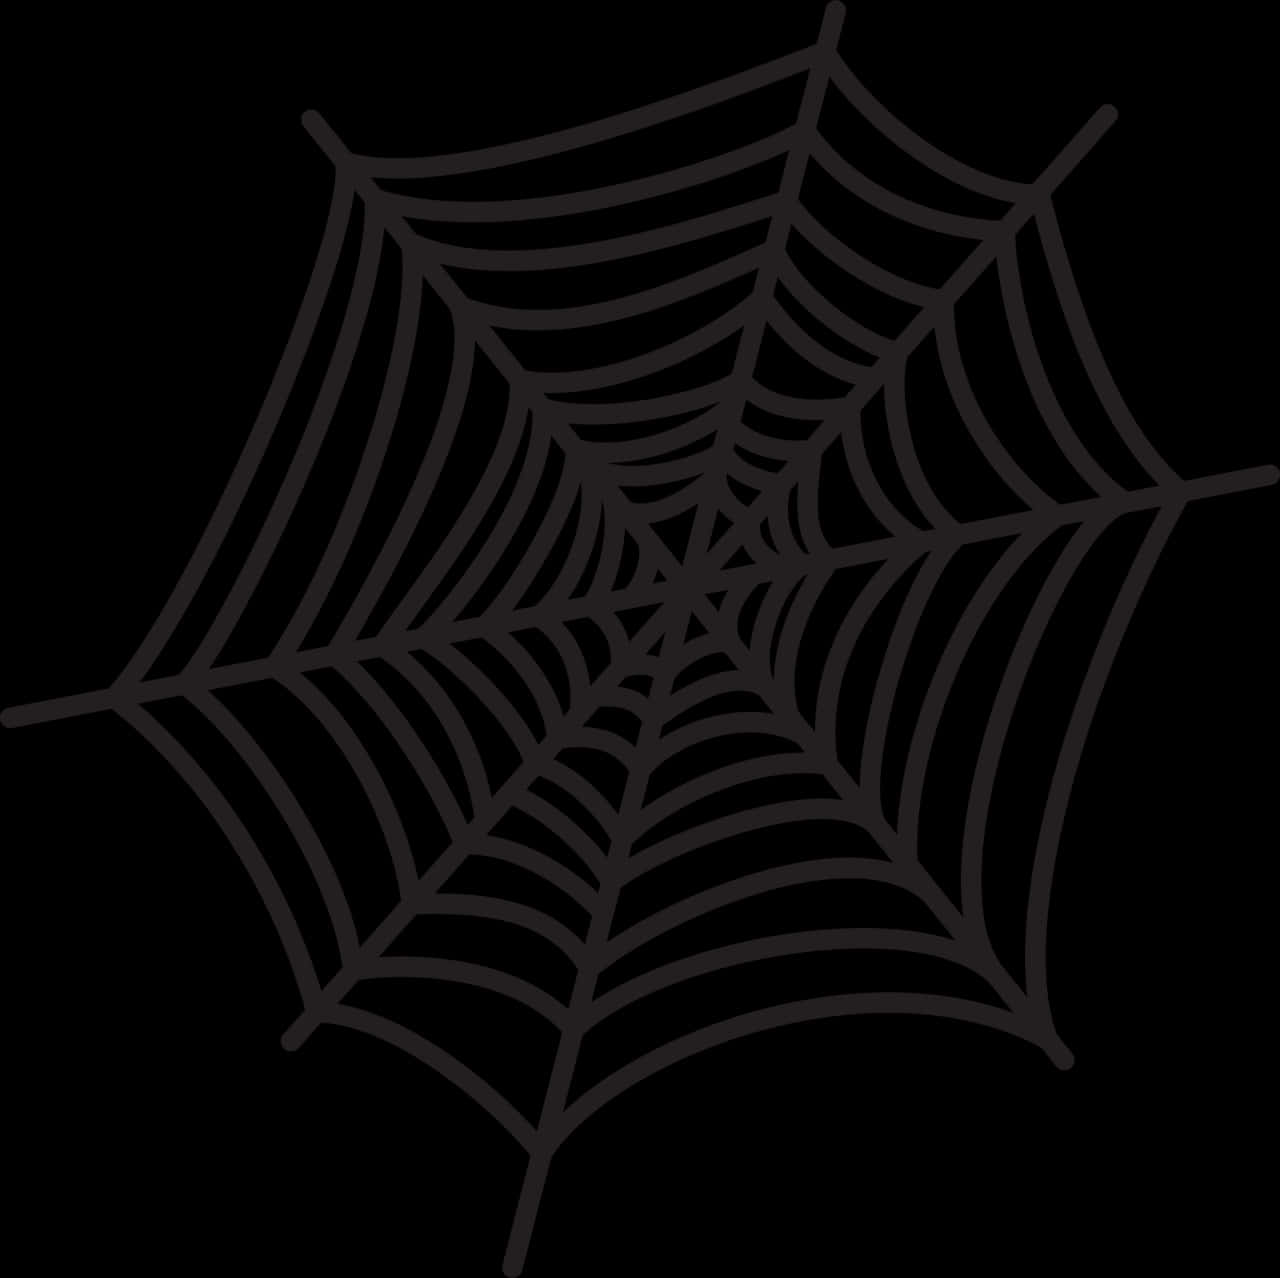 Simplified Spider Web Graphic PNG